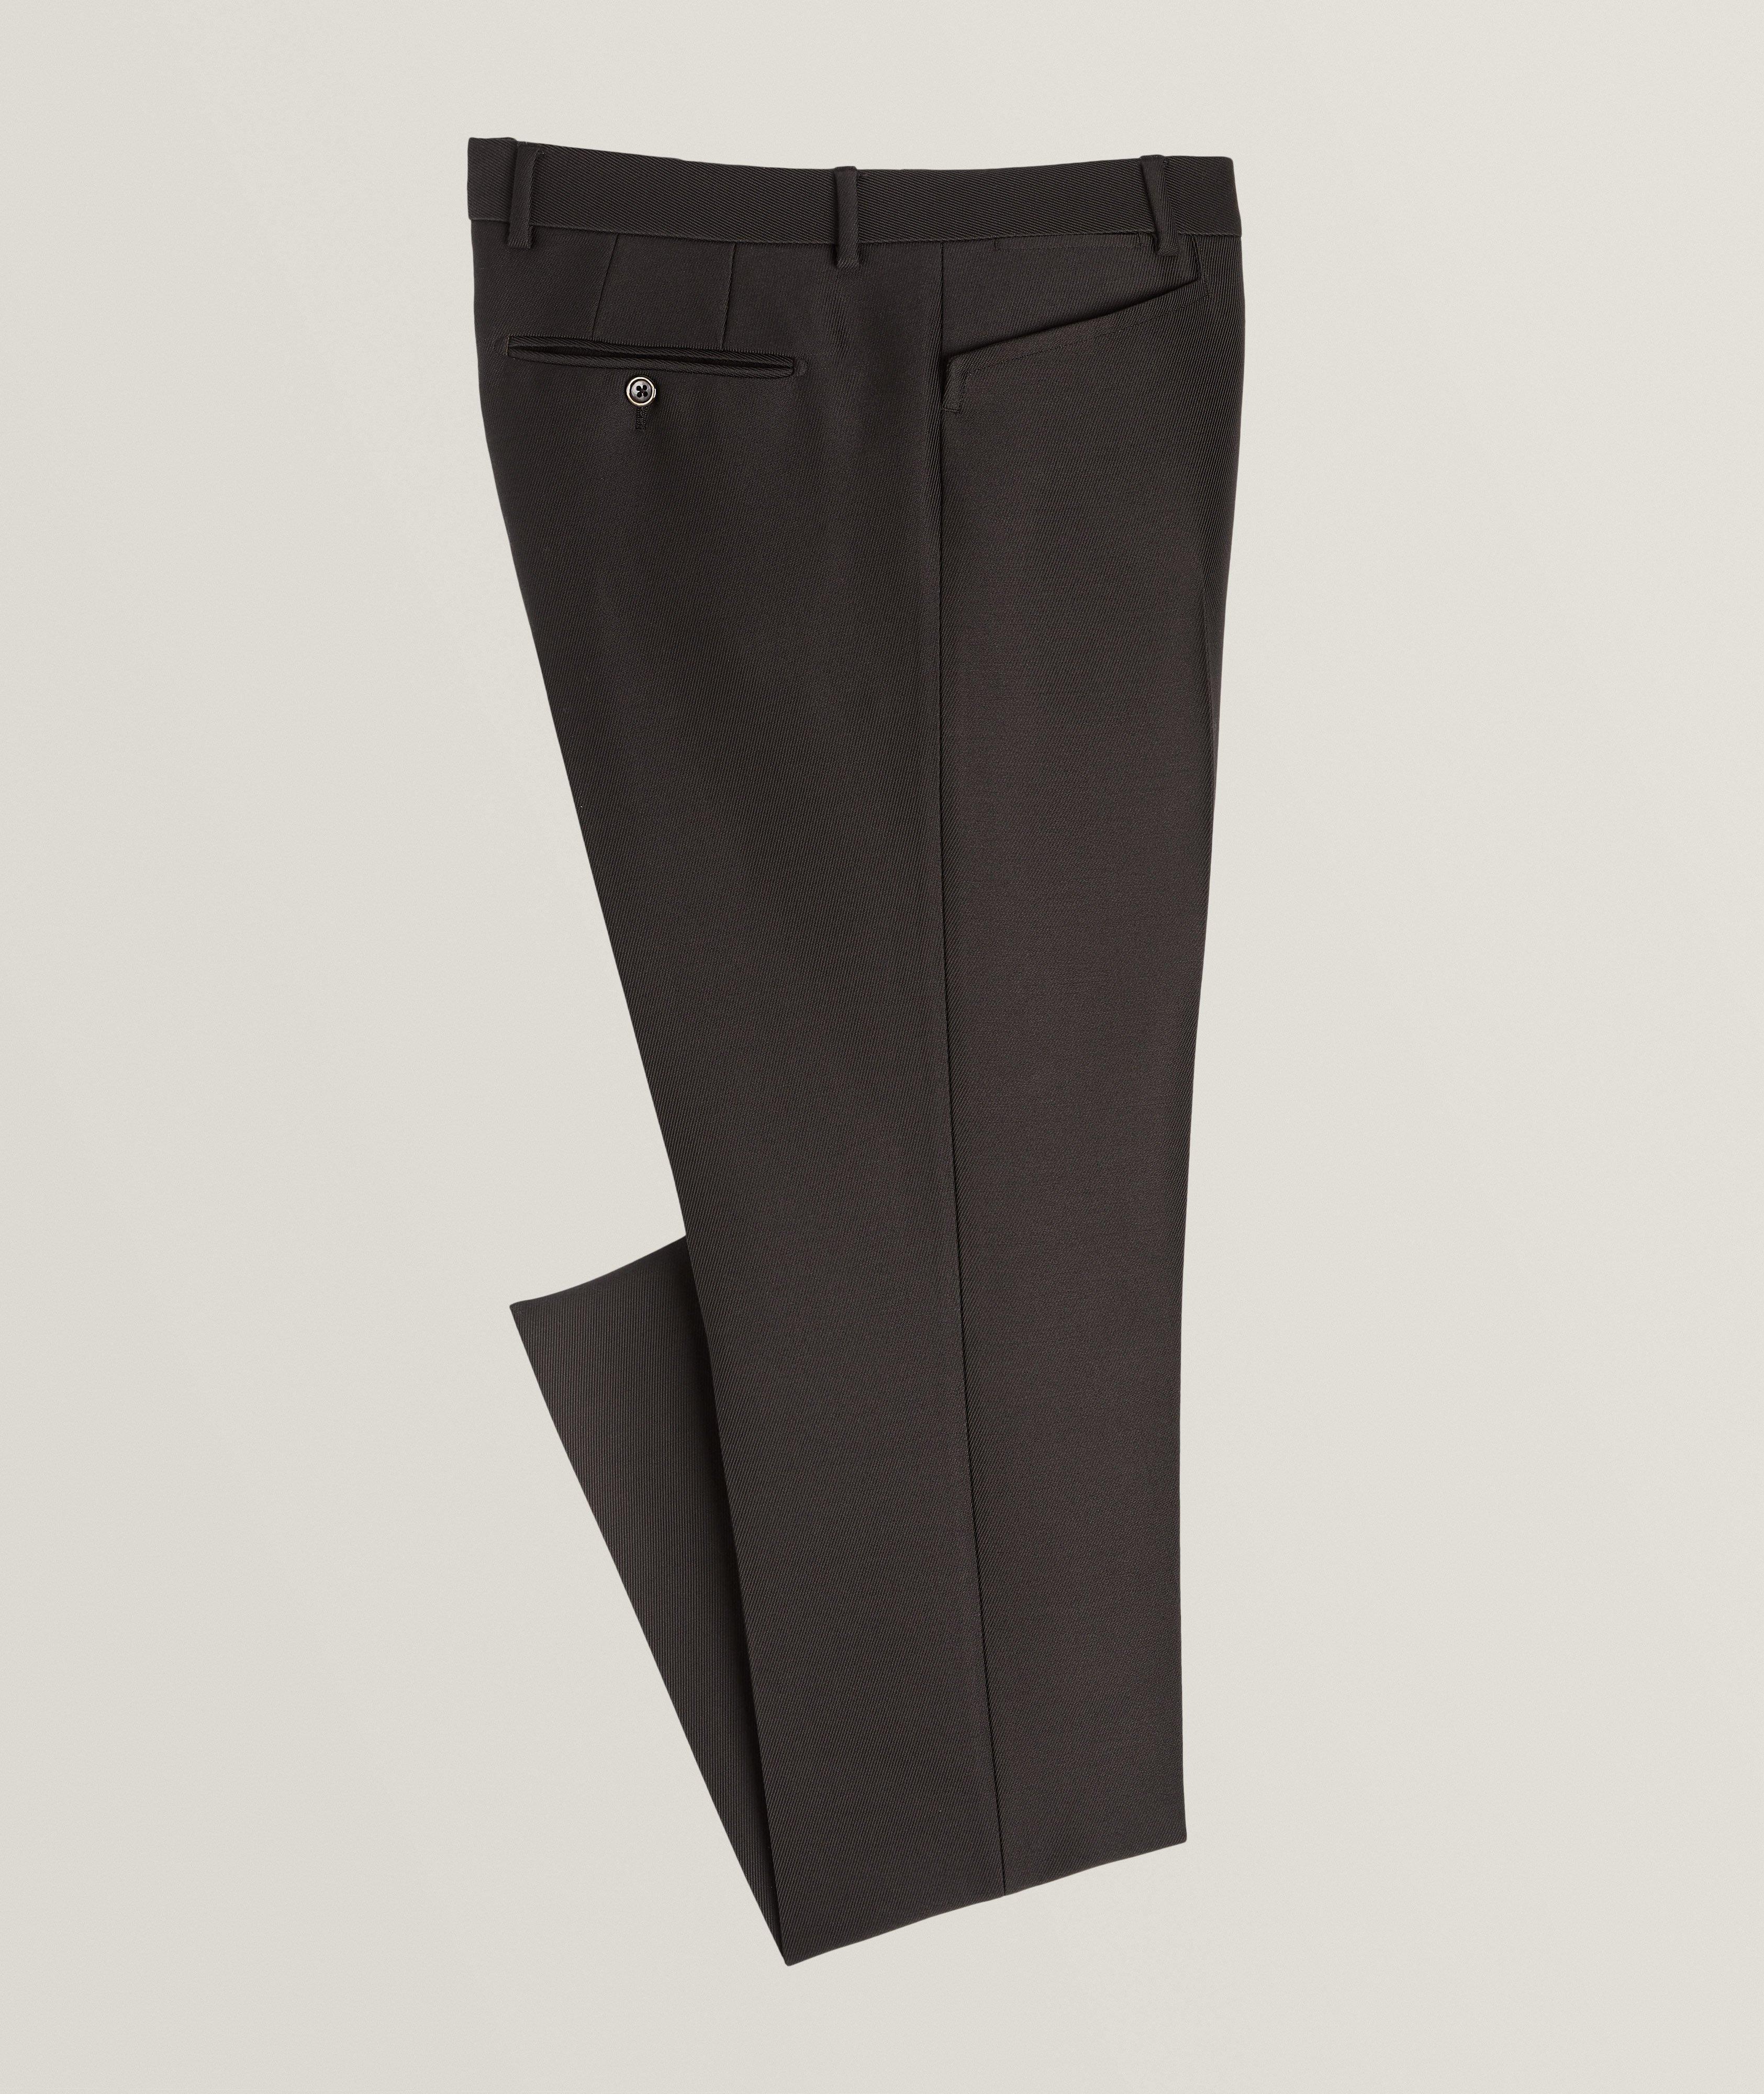 Atticus Western Style Five-Pocket Pants  image 0